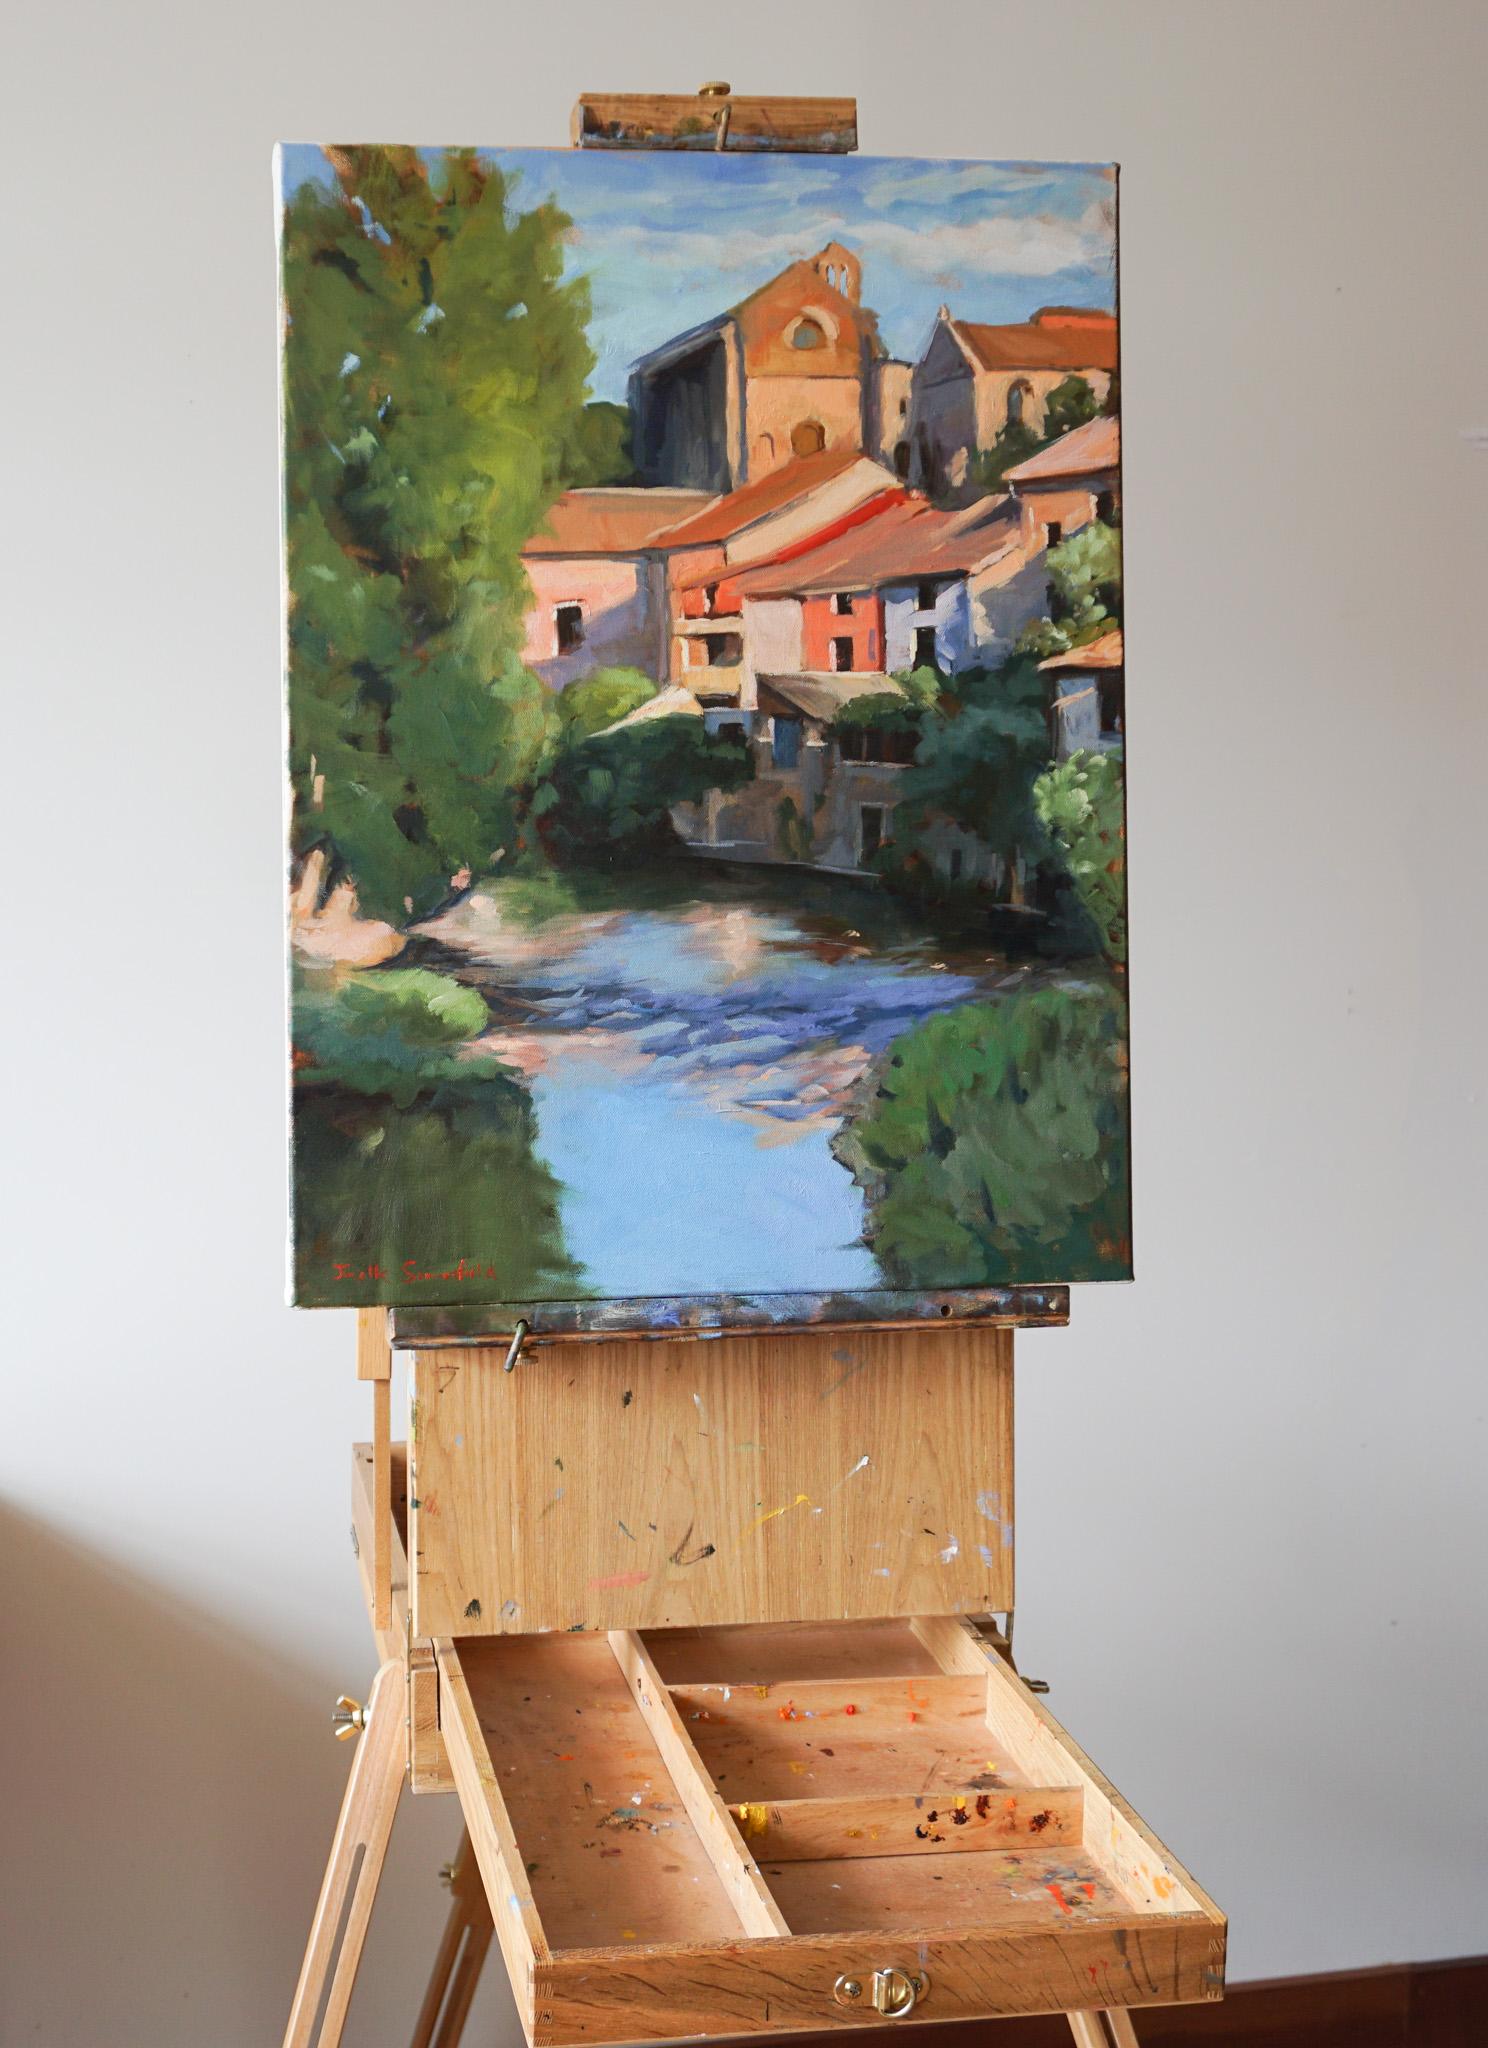 <p>Artist Comments<br>The painting offers a glimpse of the houses surrounding a river in Estella, Spain, a charming town along the Camino de Santiago. The sun casts a warm glow onto the picturesque location, tossing shadows onto apricot-colored